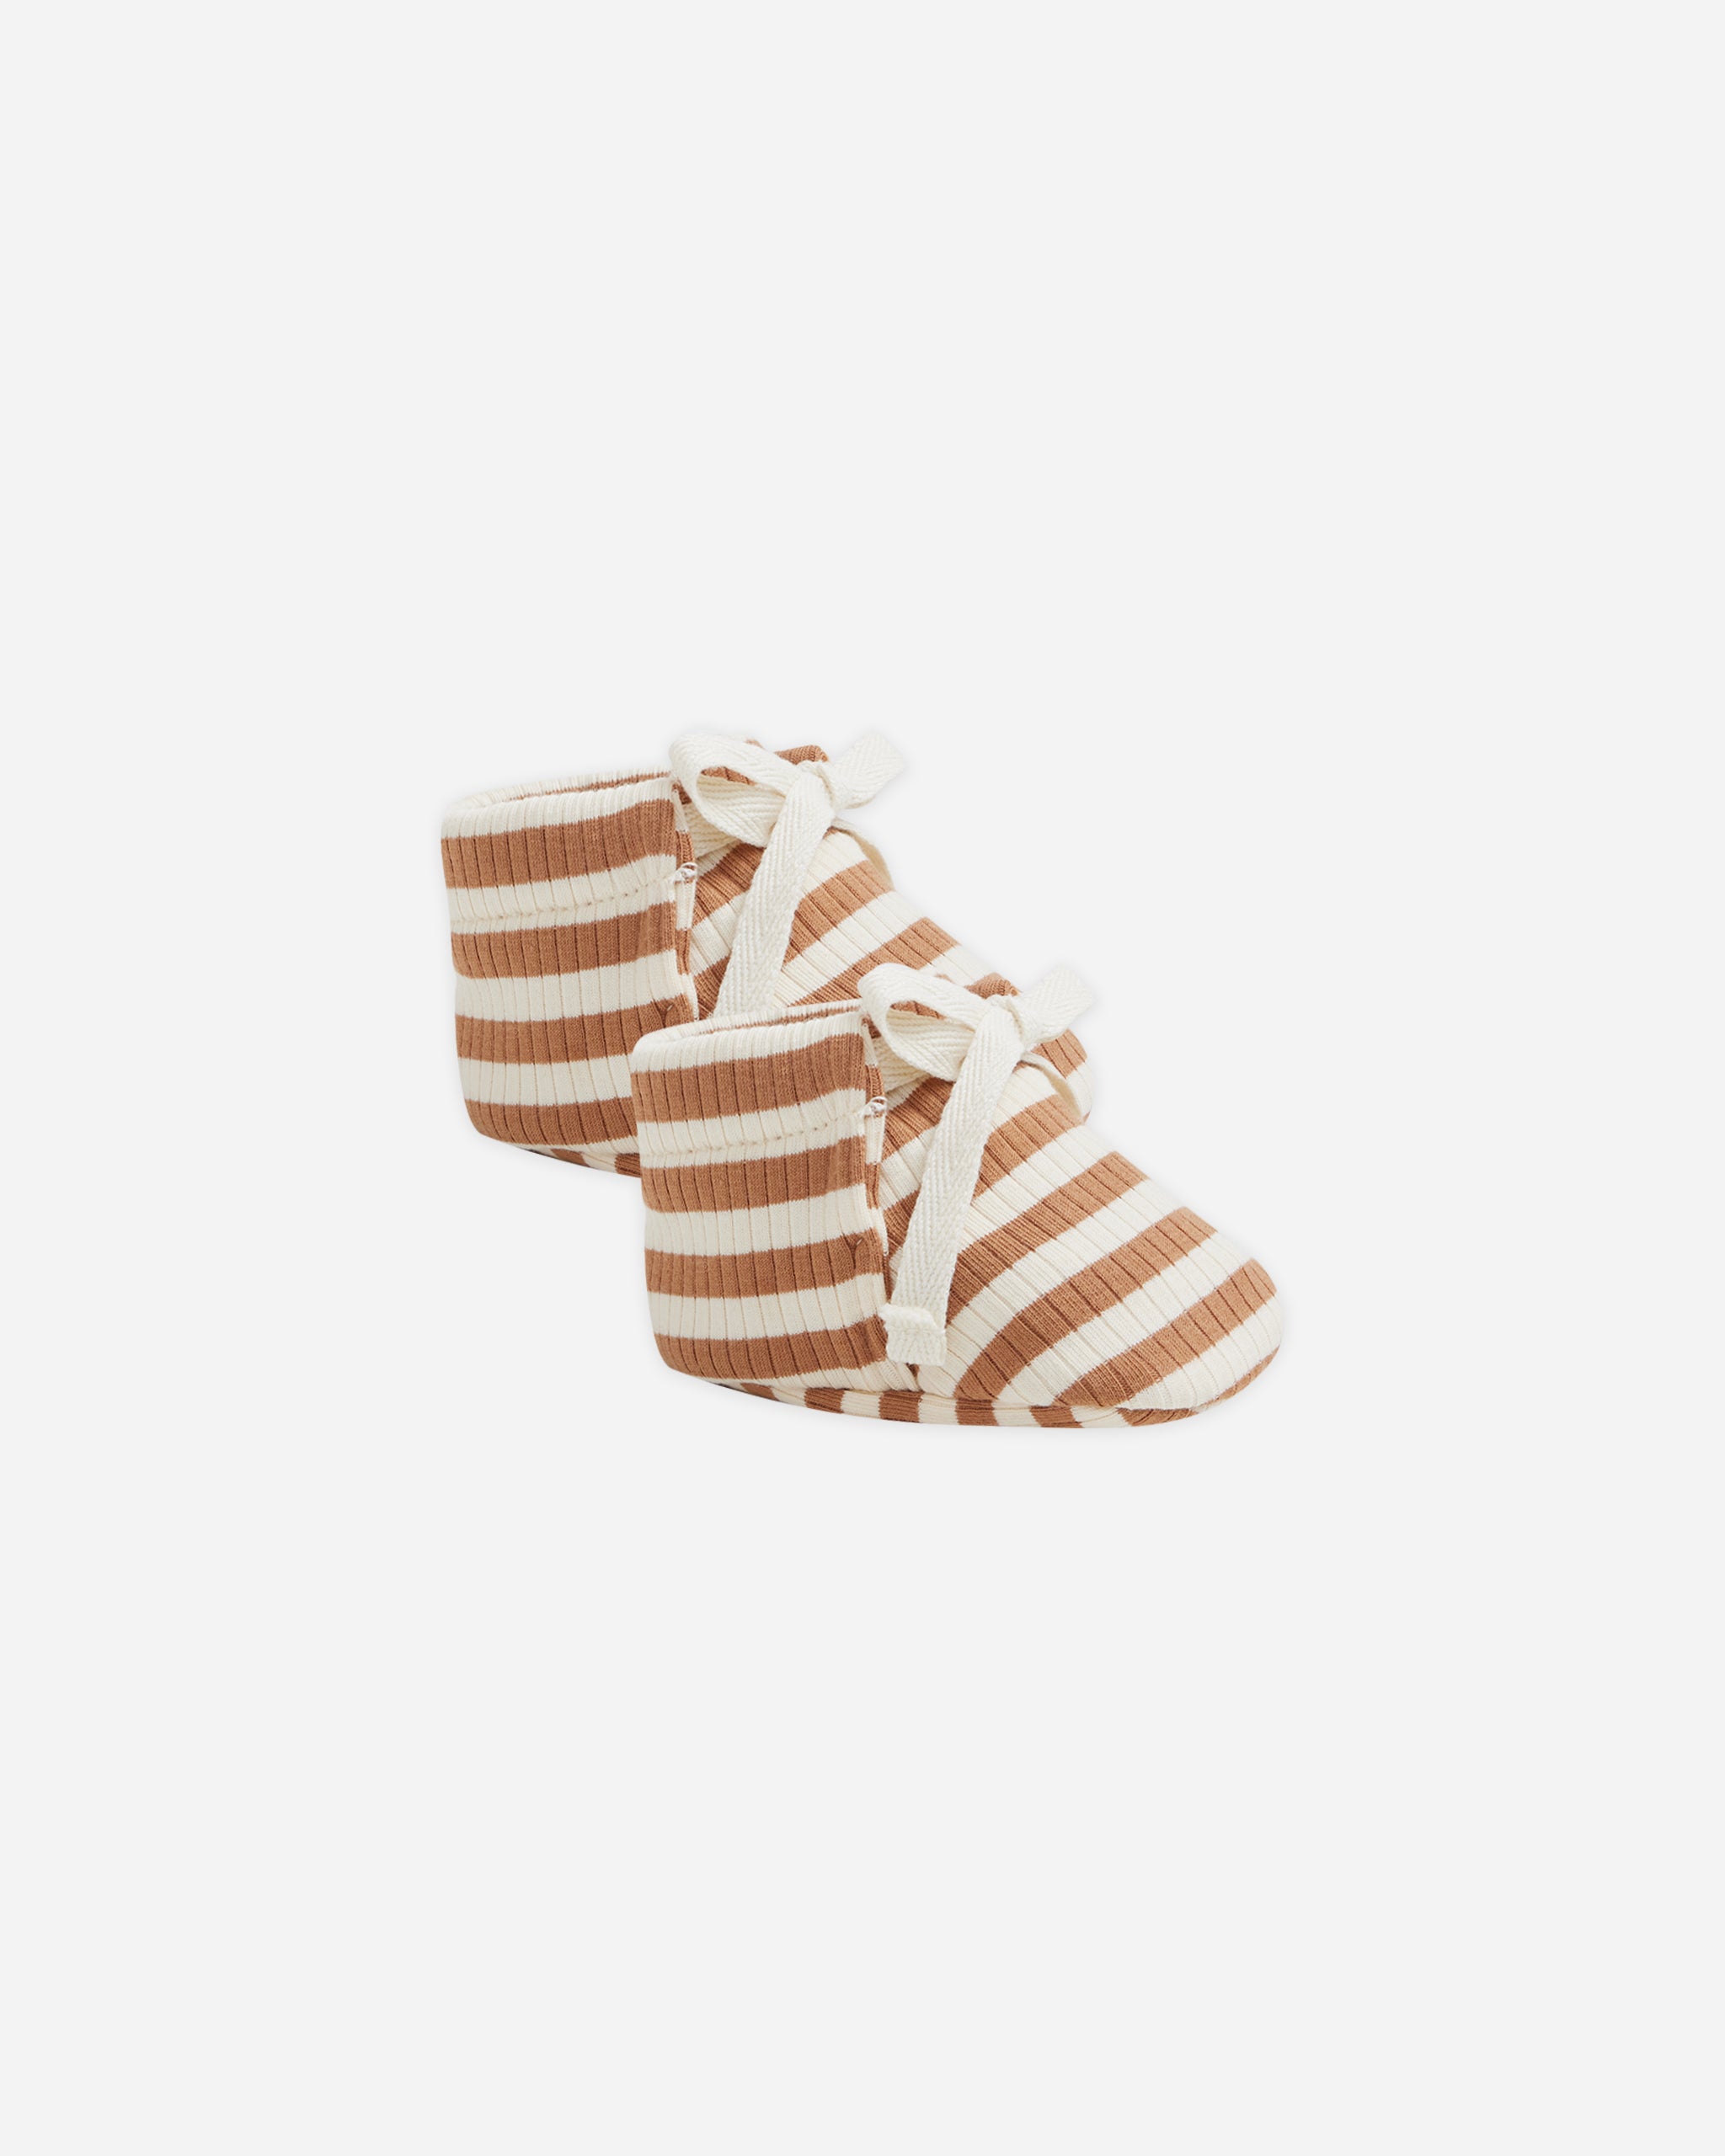 Ribbed Baby Booties || Cinnamon Stripe - Rylee + Cru | Kids Clothes | Trendy Baby Clothes | Modern Infant Outfits |